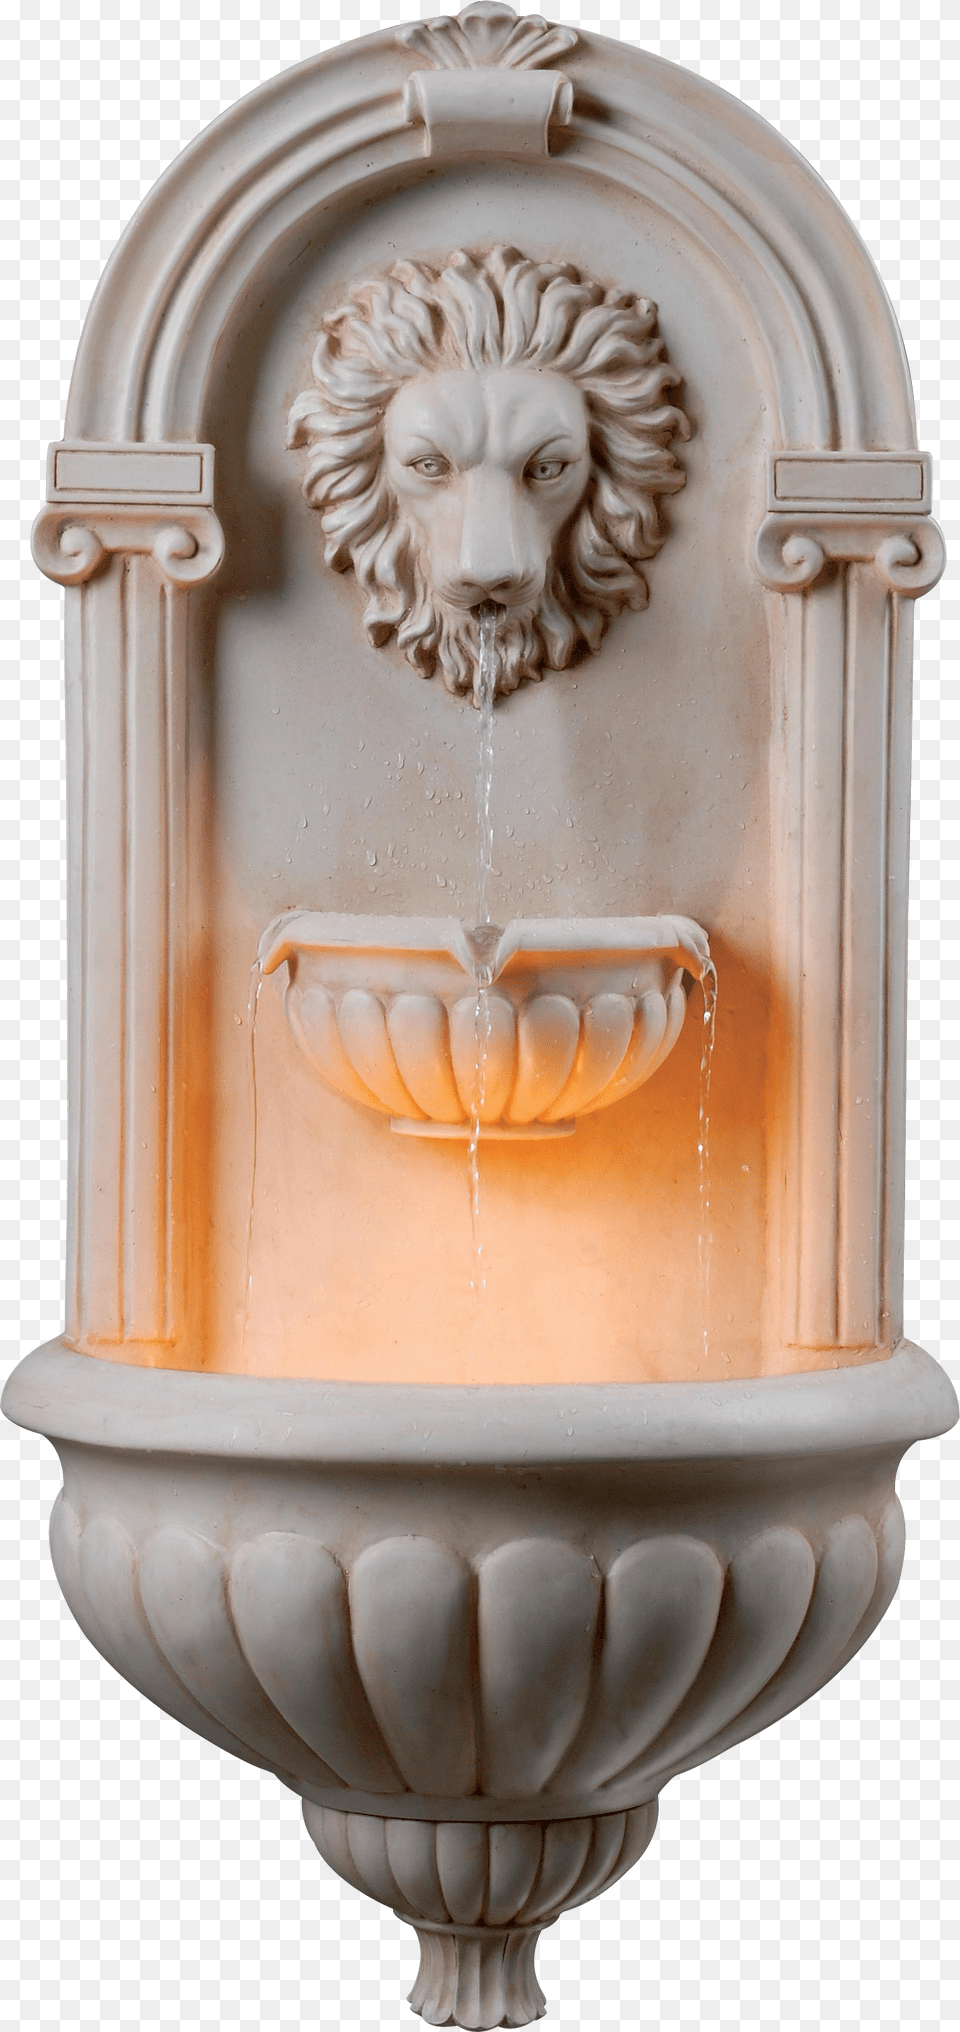 Fountain, Architecture, Water, Drinking Fountain, Hot Tub Png